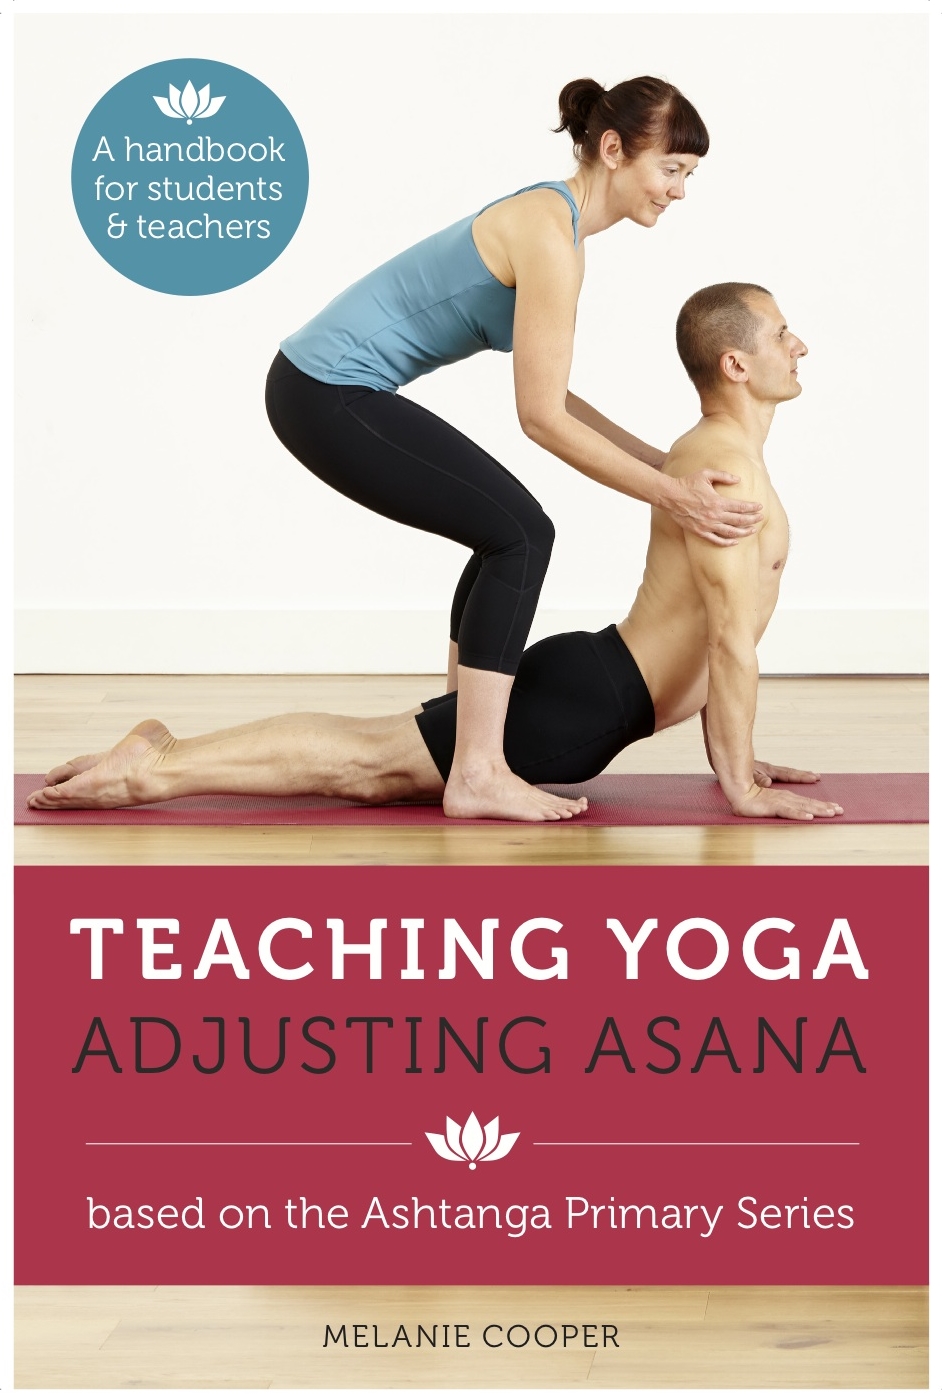 Yoga Teacher Training Course. This course is created for individuals with  aspirations of becoming yoga teachers but is appropriate for any individual  wishing to…